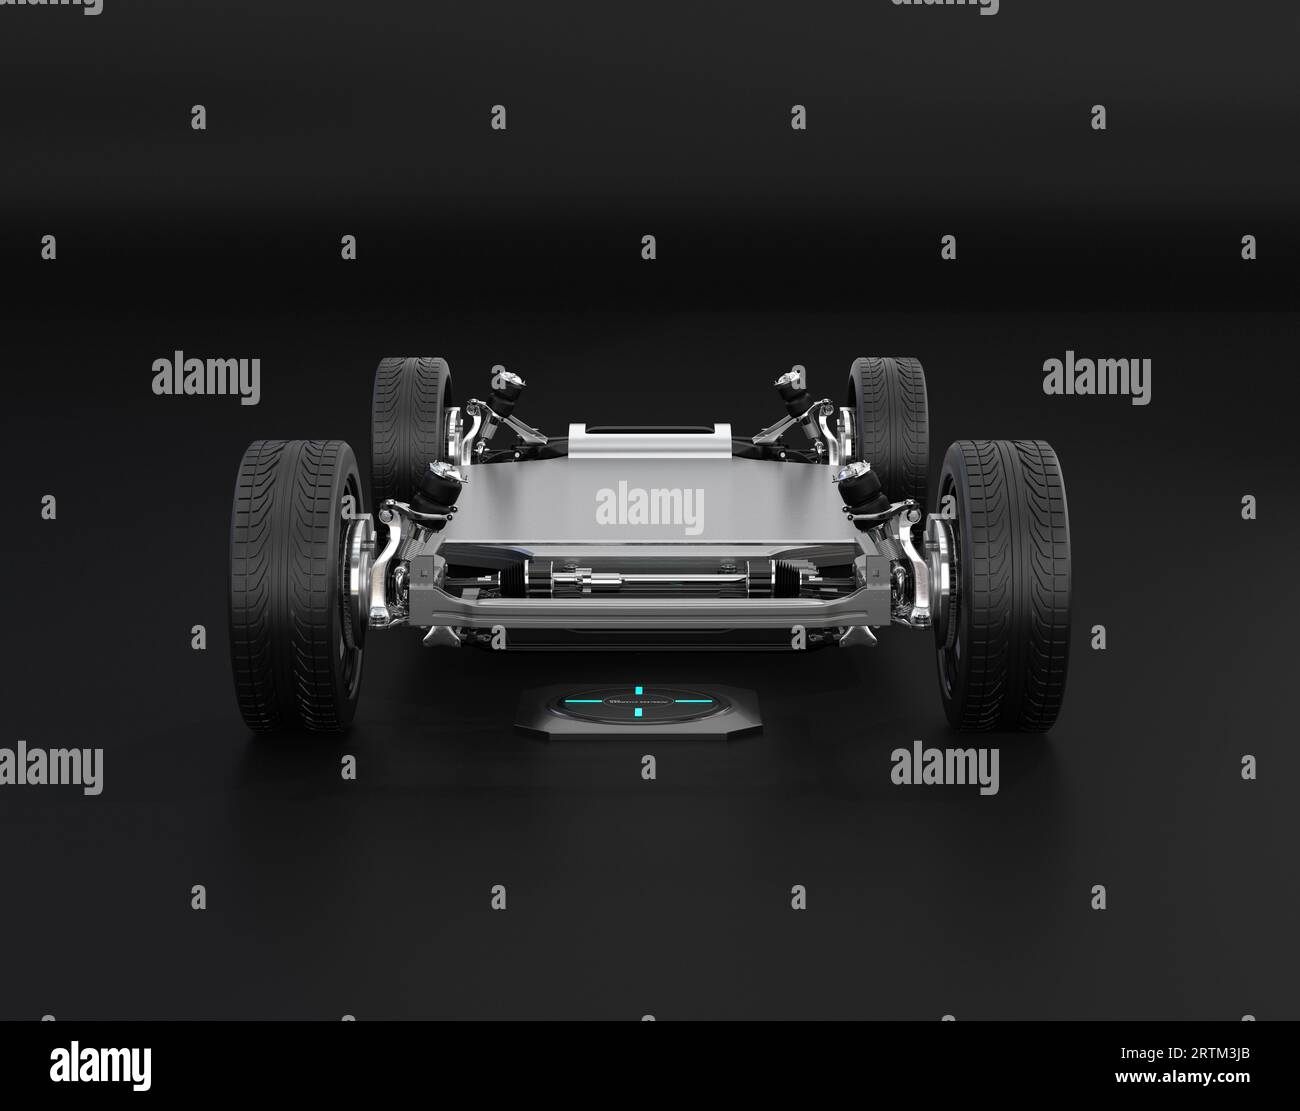 Front view of Electric vehicle Chassis equipped with In-Wheel Motors wireless charging in Charging station. 3D rendering image. Stock Photo